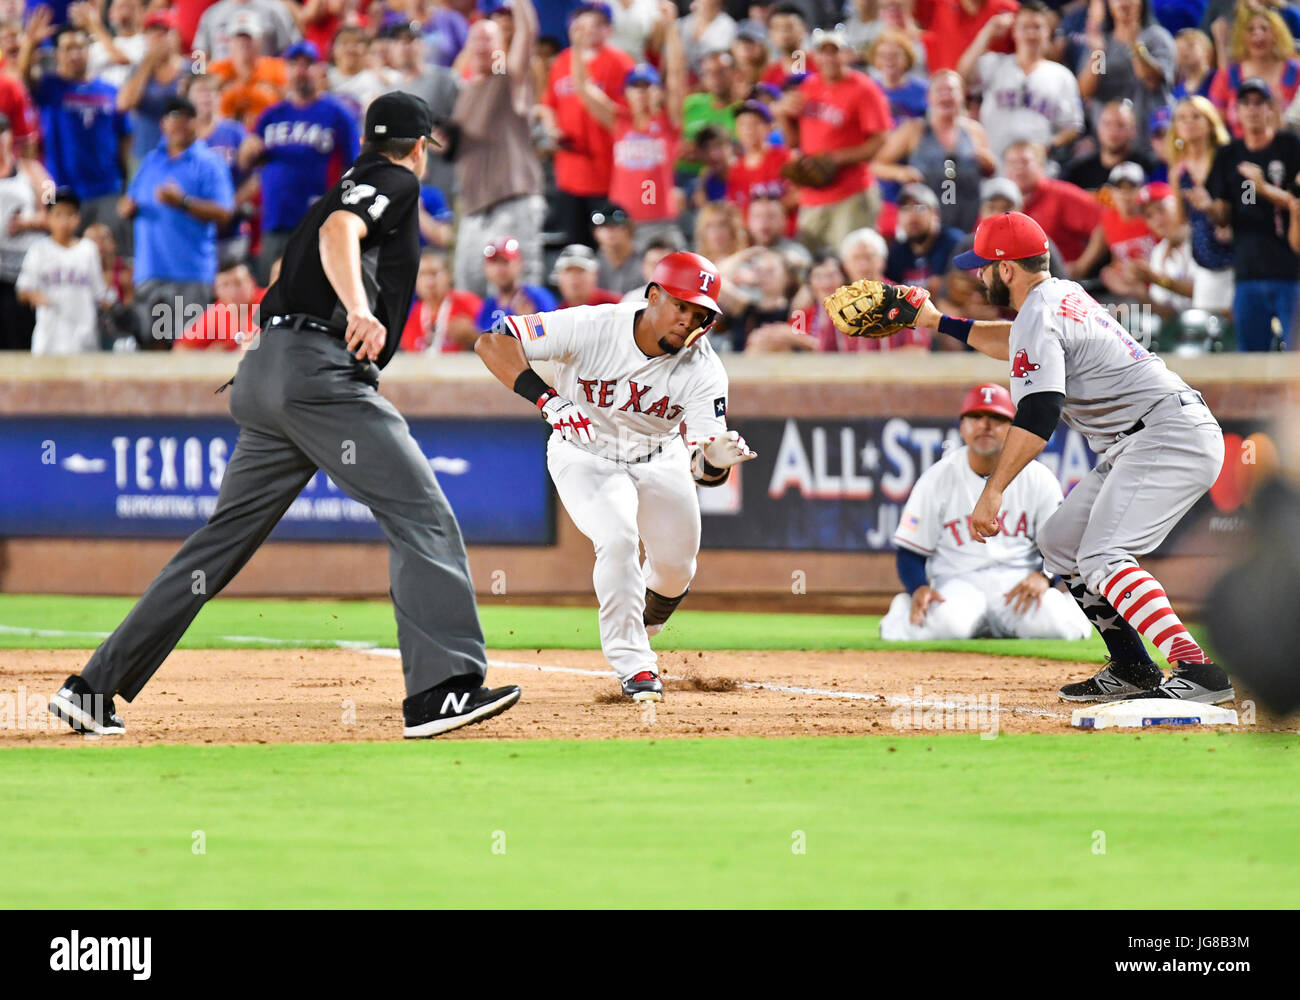 Arlington, Texas, USA. 3rd July, 2017. Texas Rangers center fielder Carlos Gomez #14 is tagged out after reaching first base safely in the ninth inning during an MLB game between the Boston Red Sox and the Texas Rangers at Globe Life Park in Arlington, TX Boston defeated Texas 7-5 Albert Pena/CSM Credit: Cal Sport Media/Alamy Live News Stock Photo